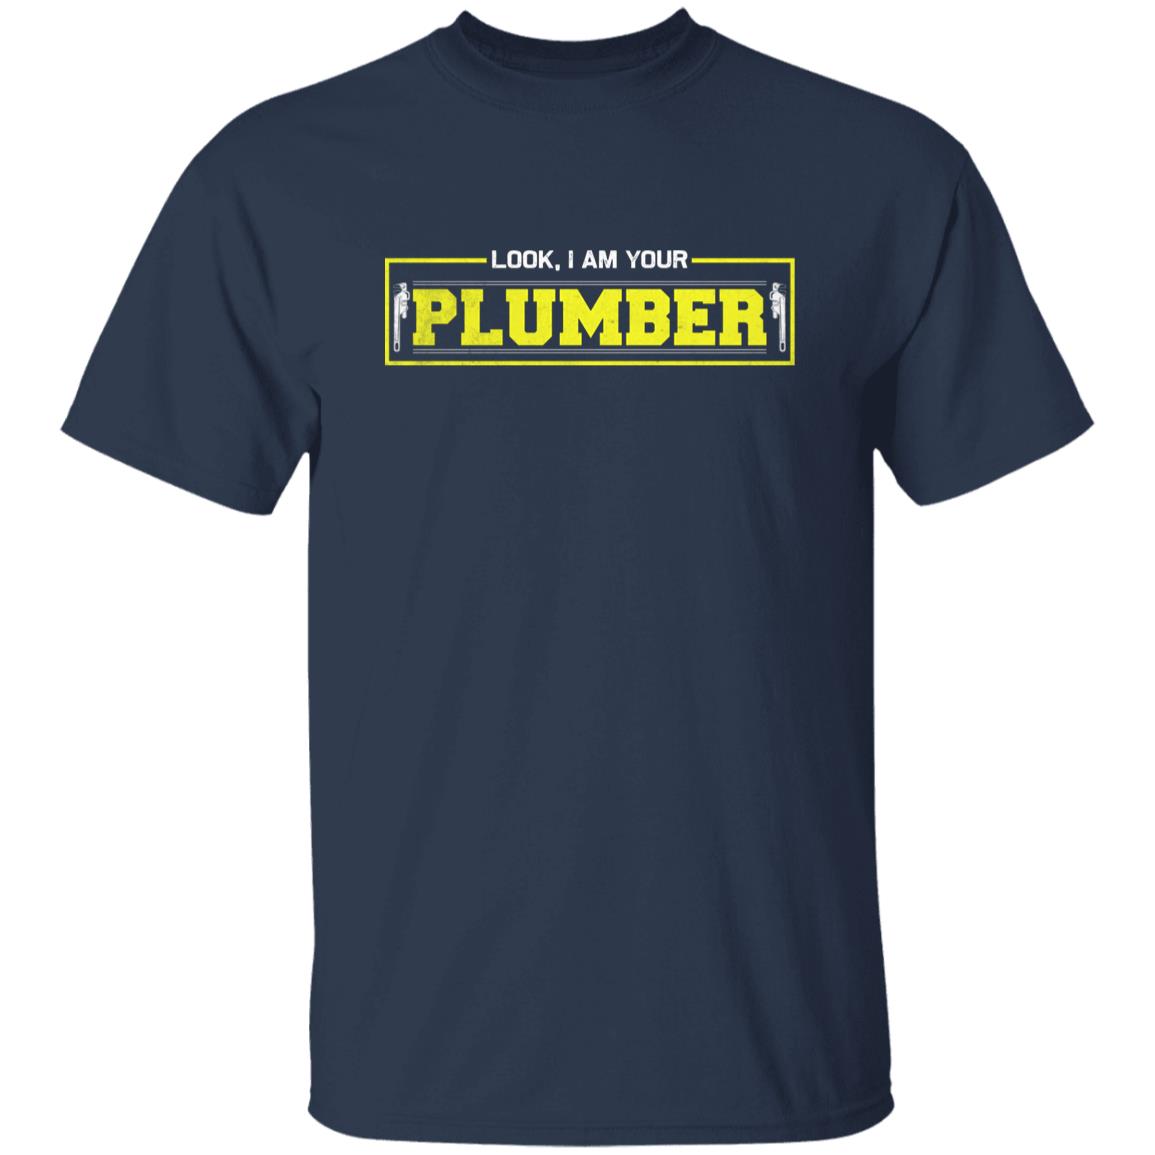 Look, I Am Your Plumber shirt funny plumber tee black navy dark heather-Navy-Family-Gift-Planet